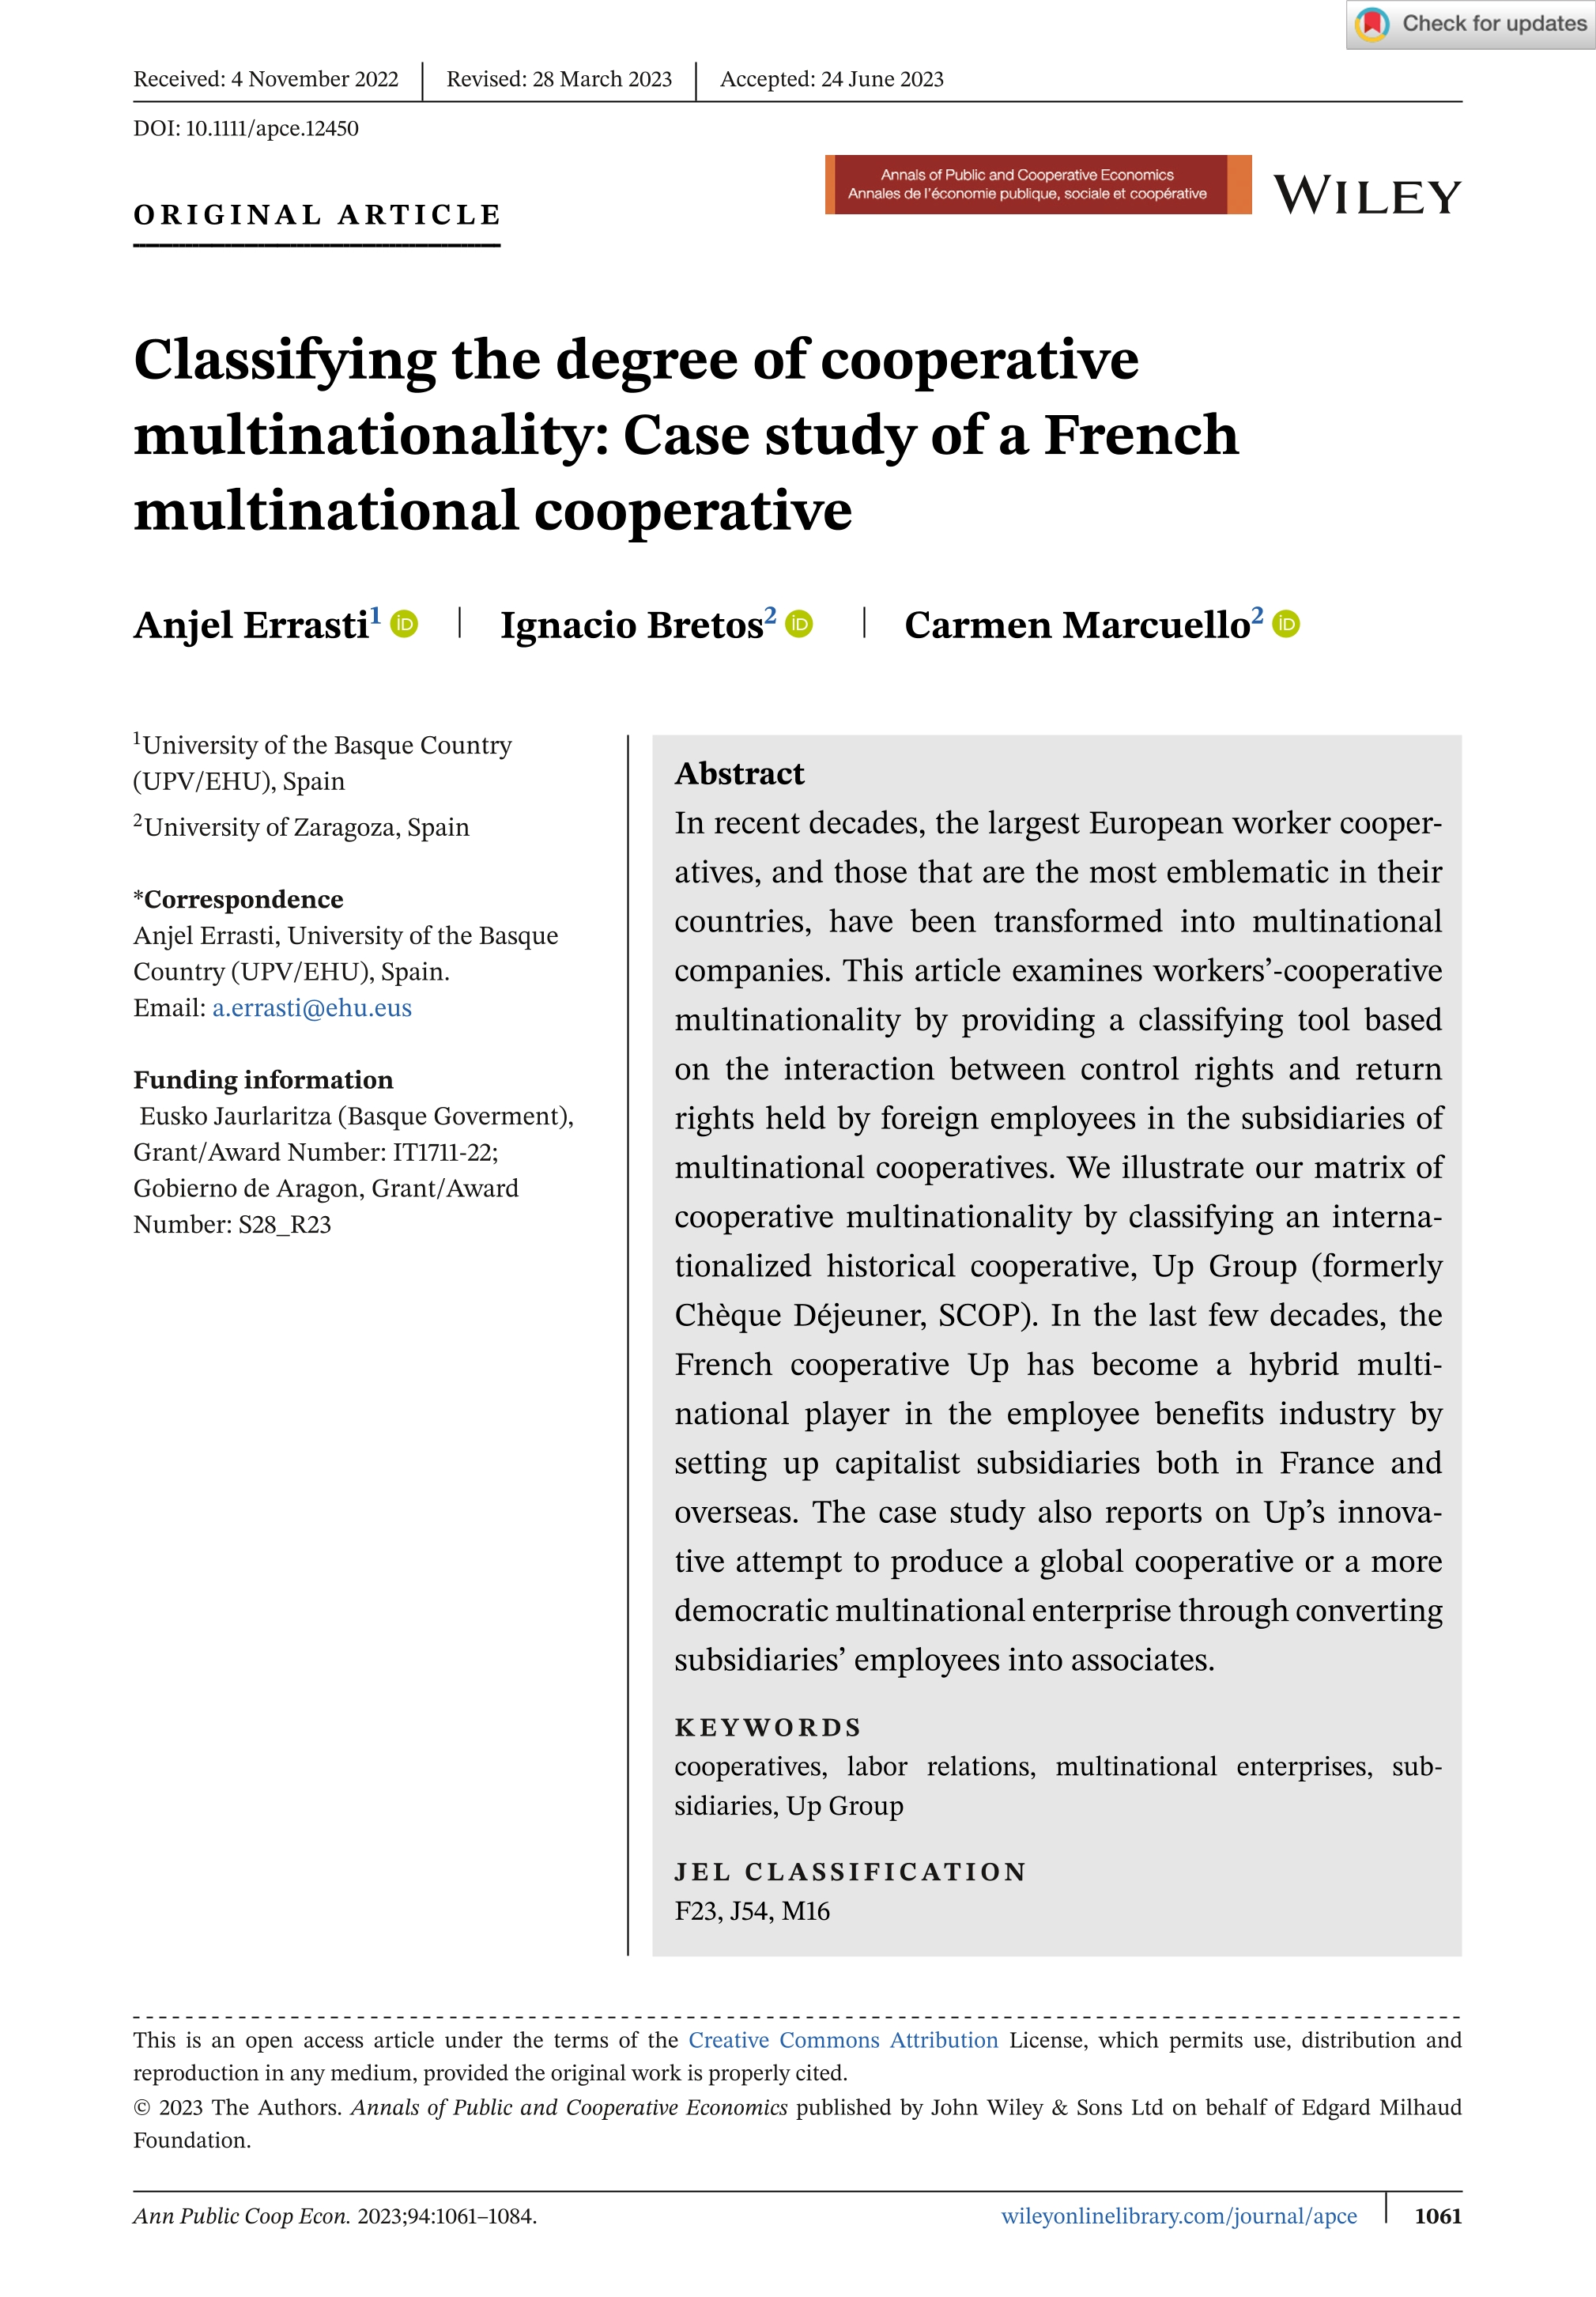 Classifying the degree of cooperative multinationality: case study of a French multinational cooperative